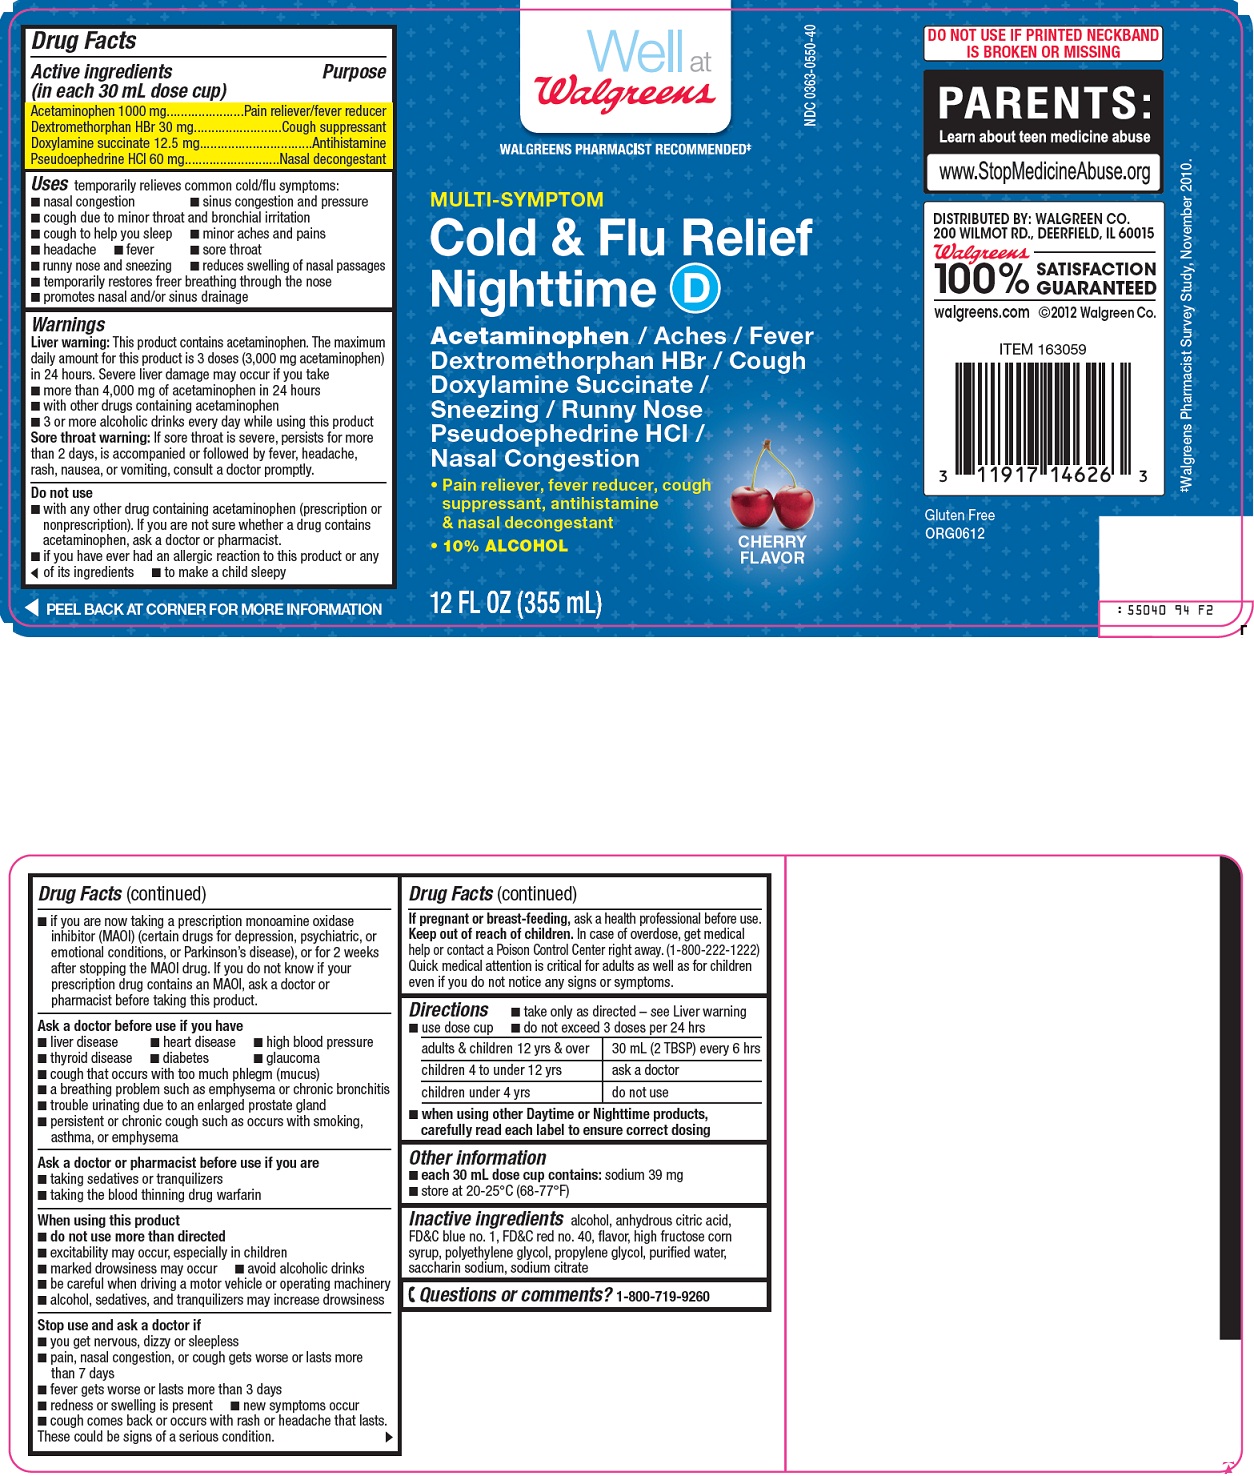 Cold & Flu Relief Nighttime D Label Image